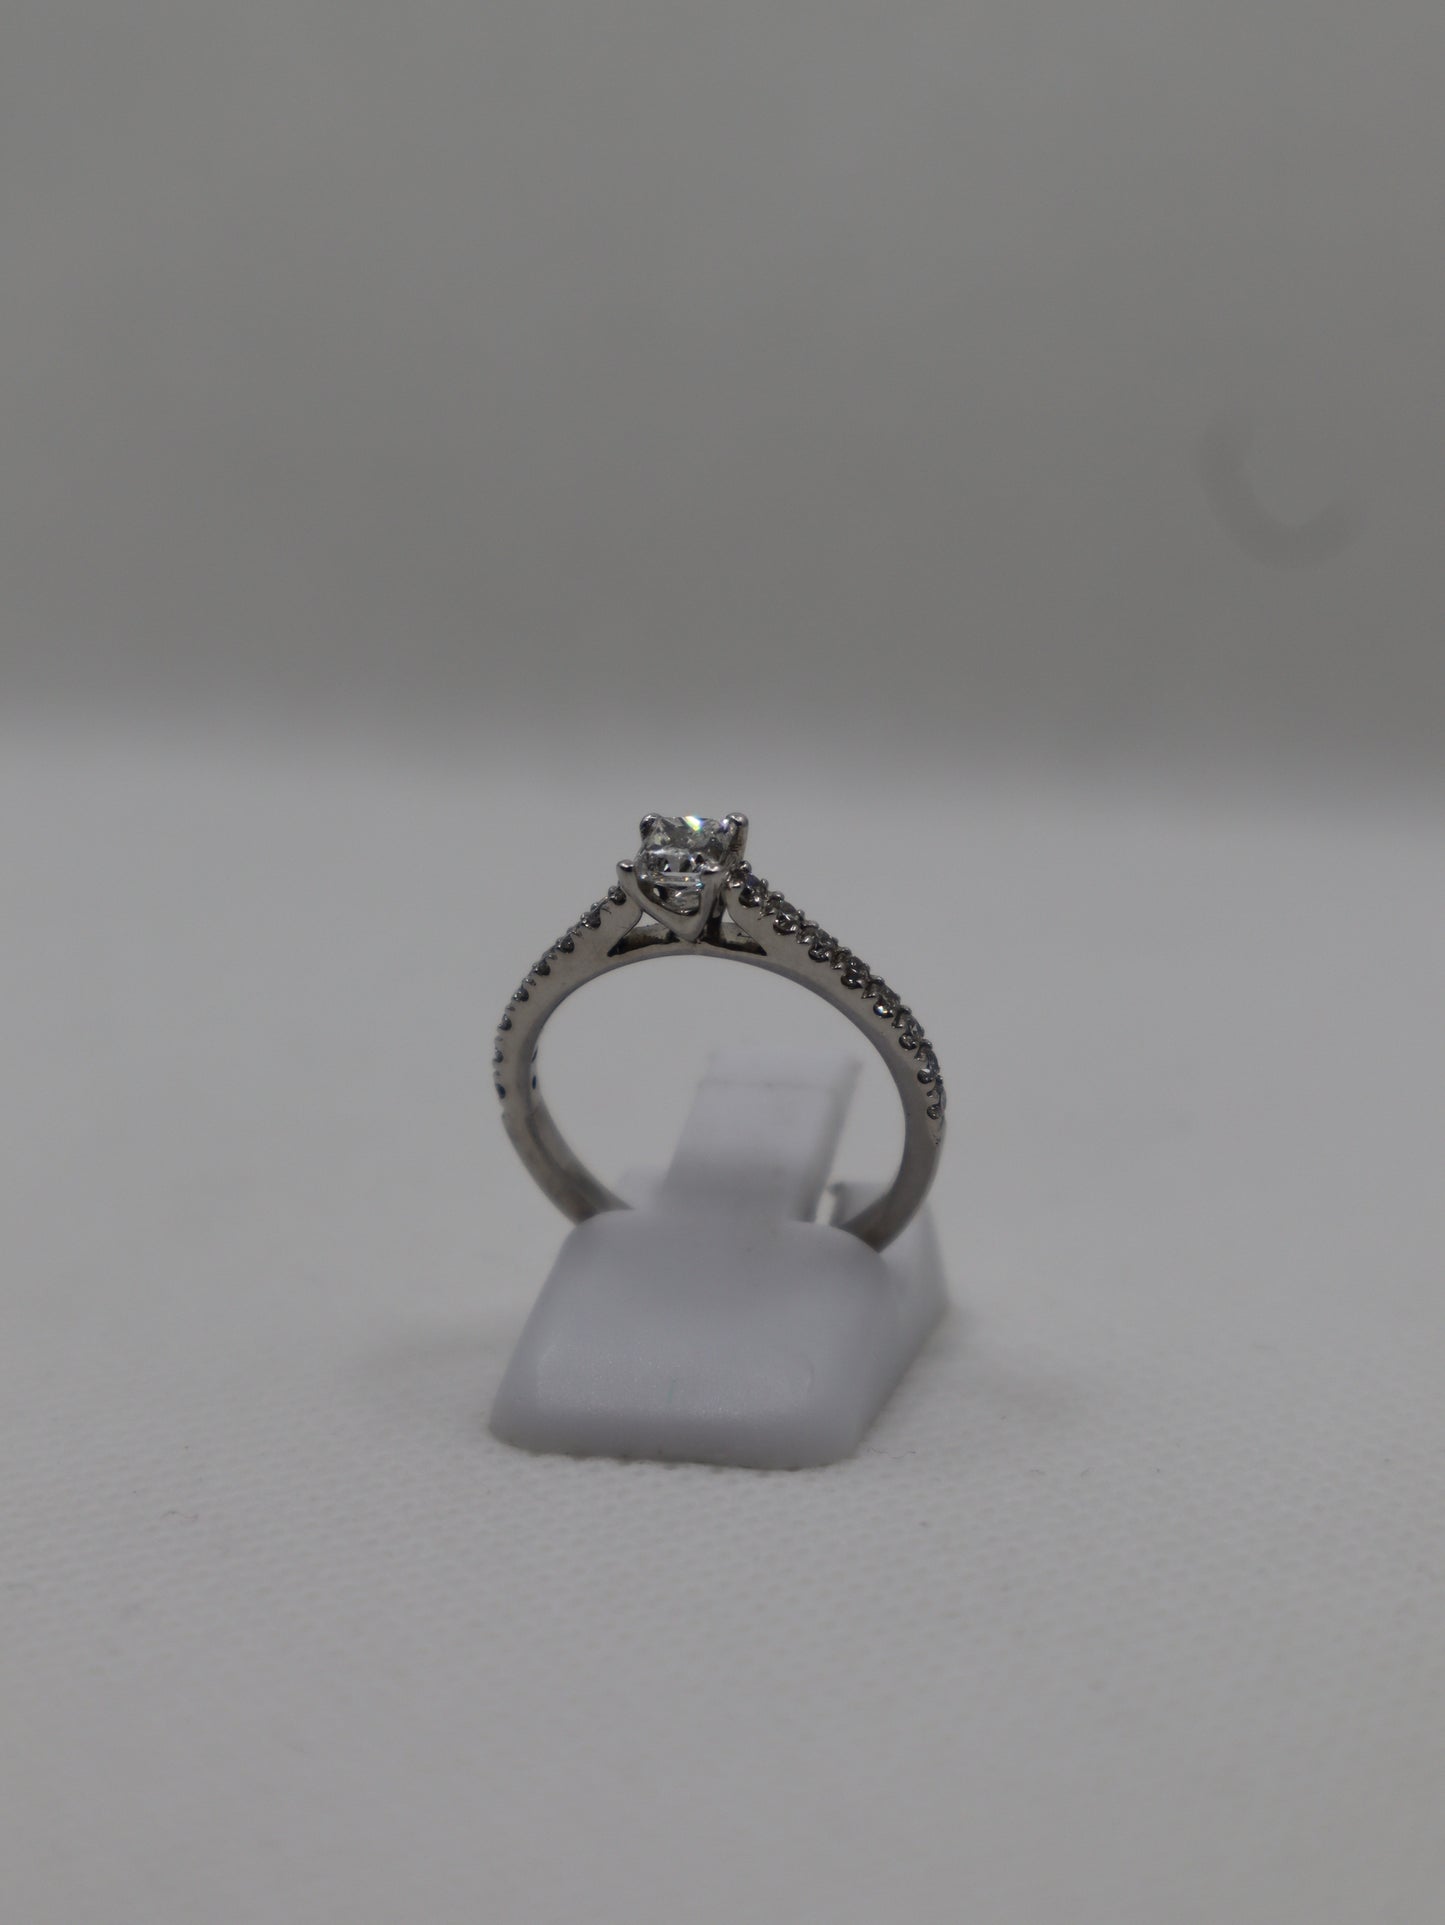 18ct White Gold Princess Cut Solitaire Ring